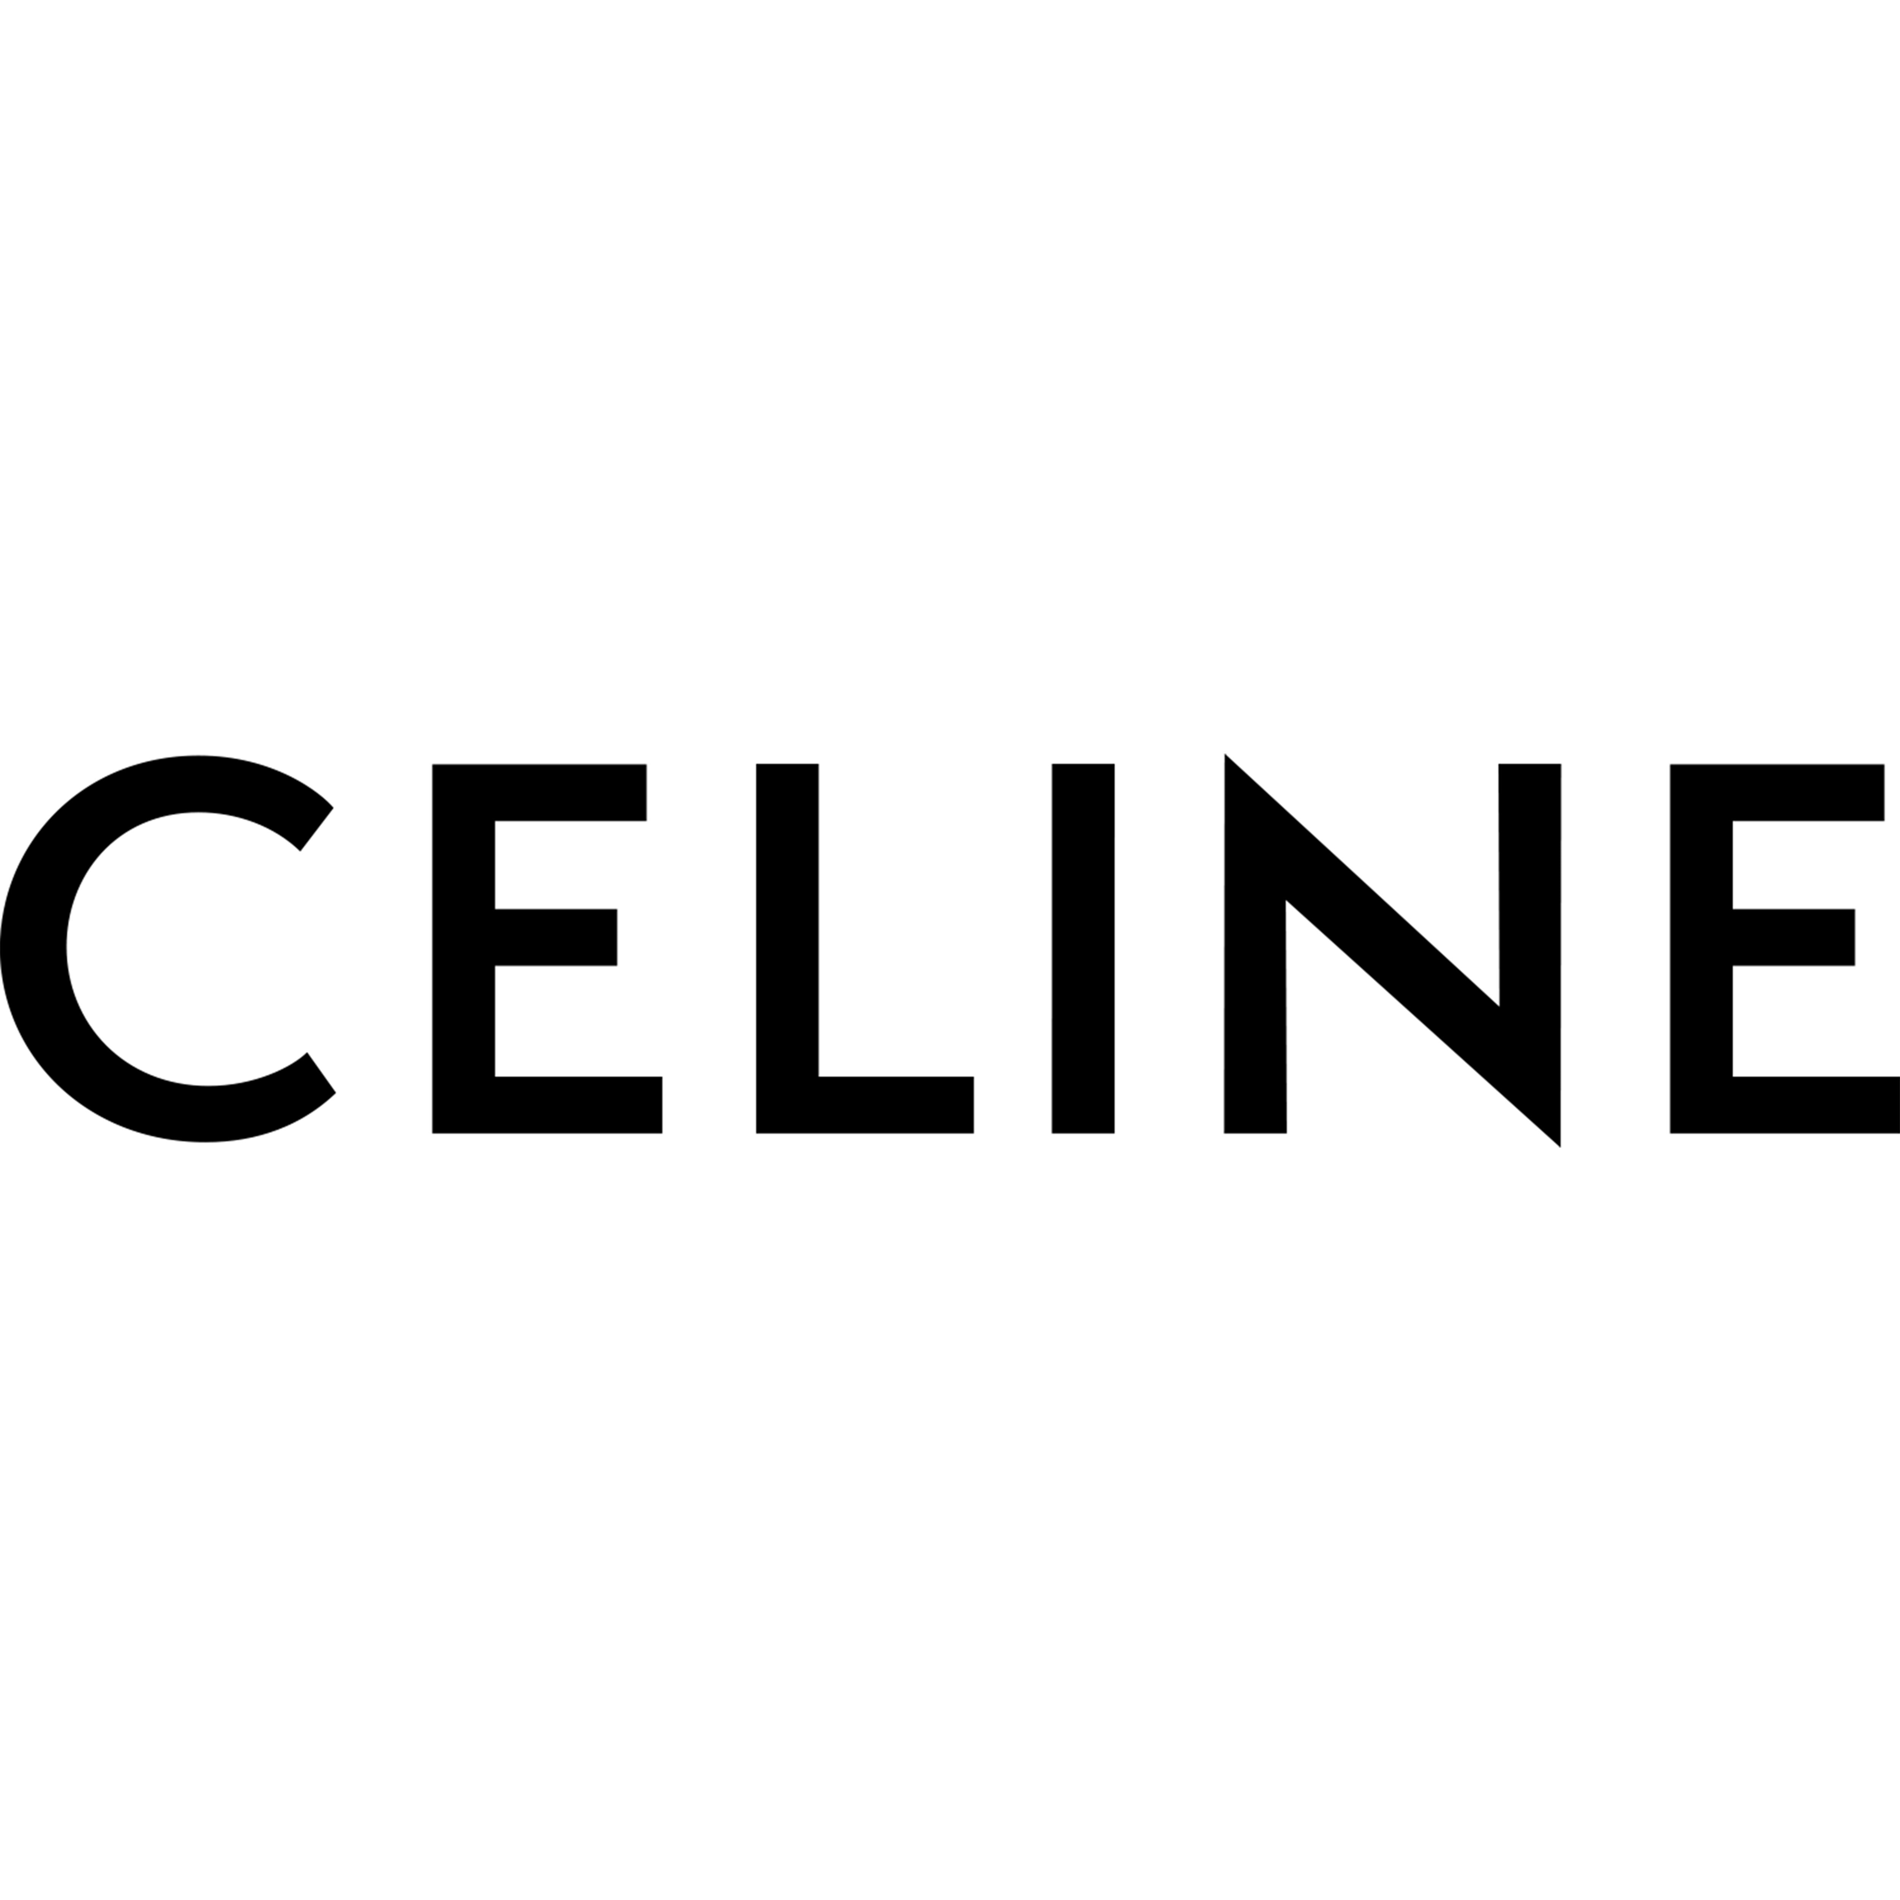 CELINE - UNITED STATES | Discover the latest collections in store.